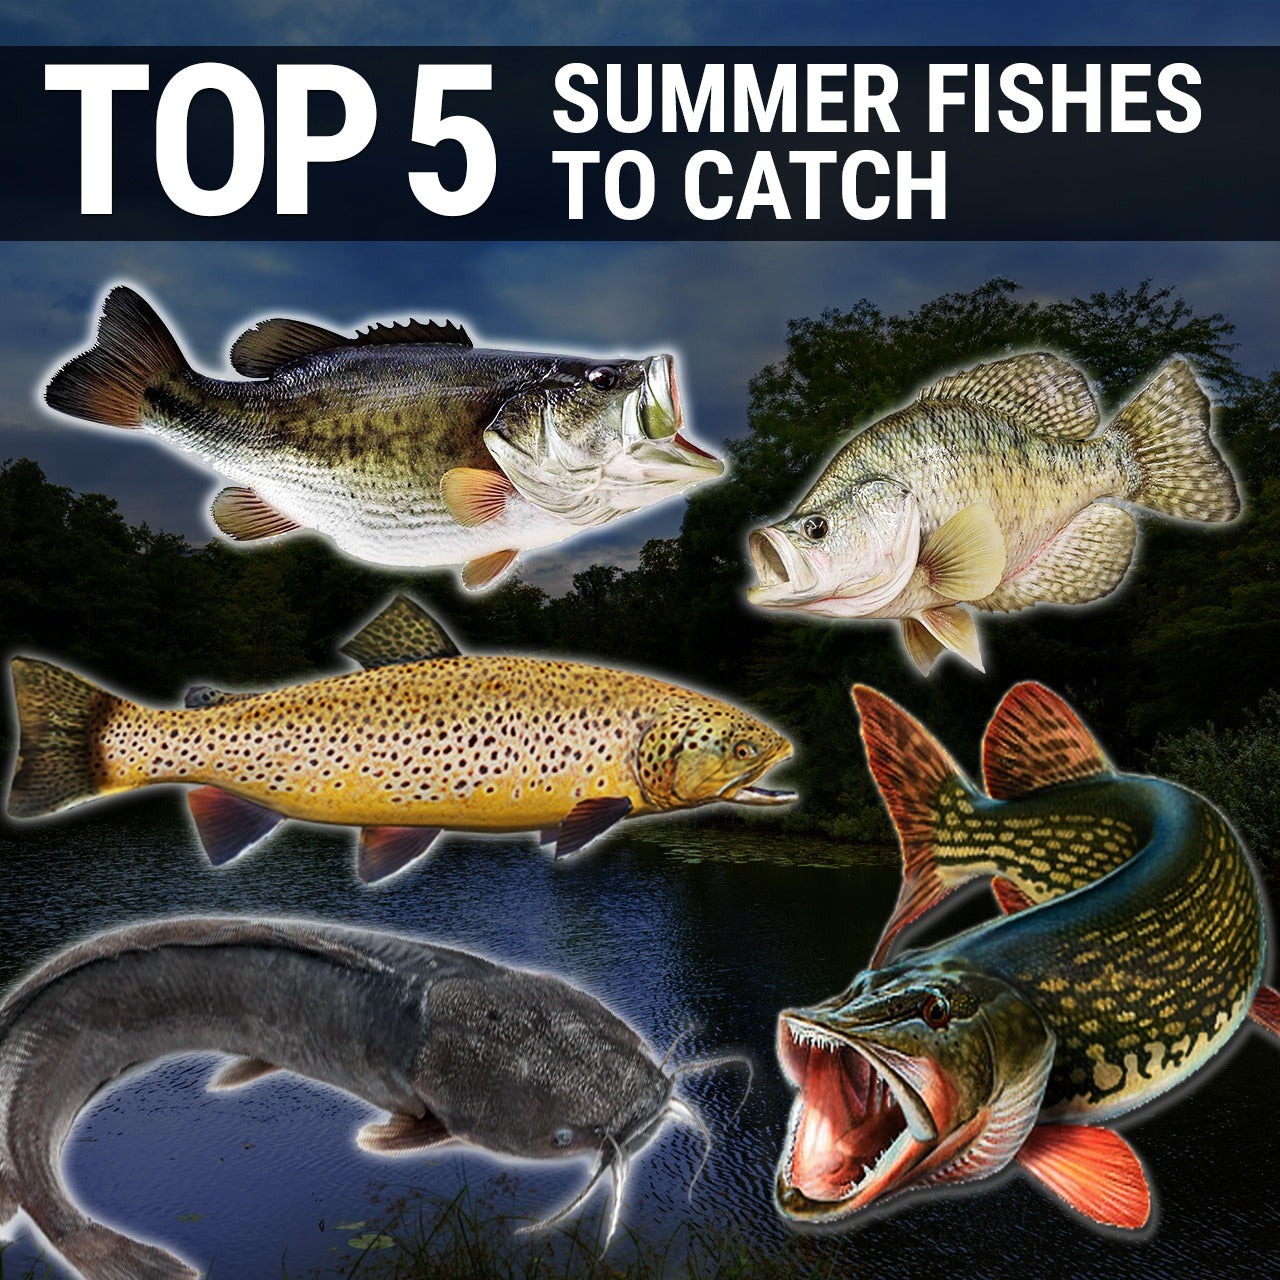 5 Tips To Catch More Fish With Your Kids